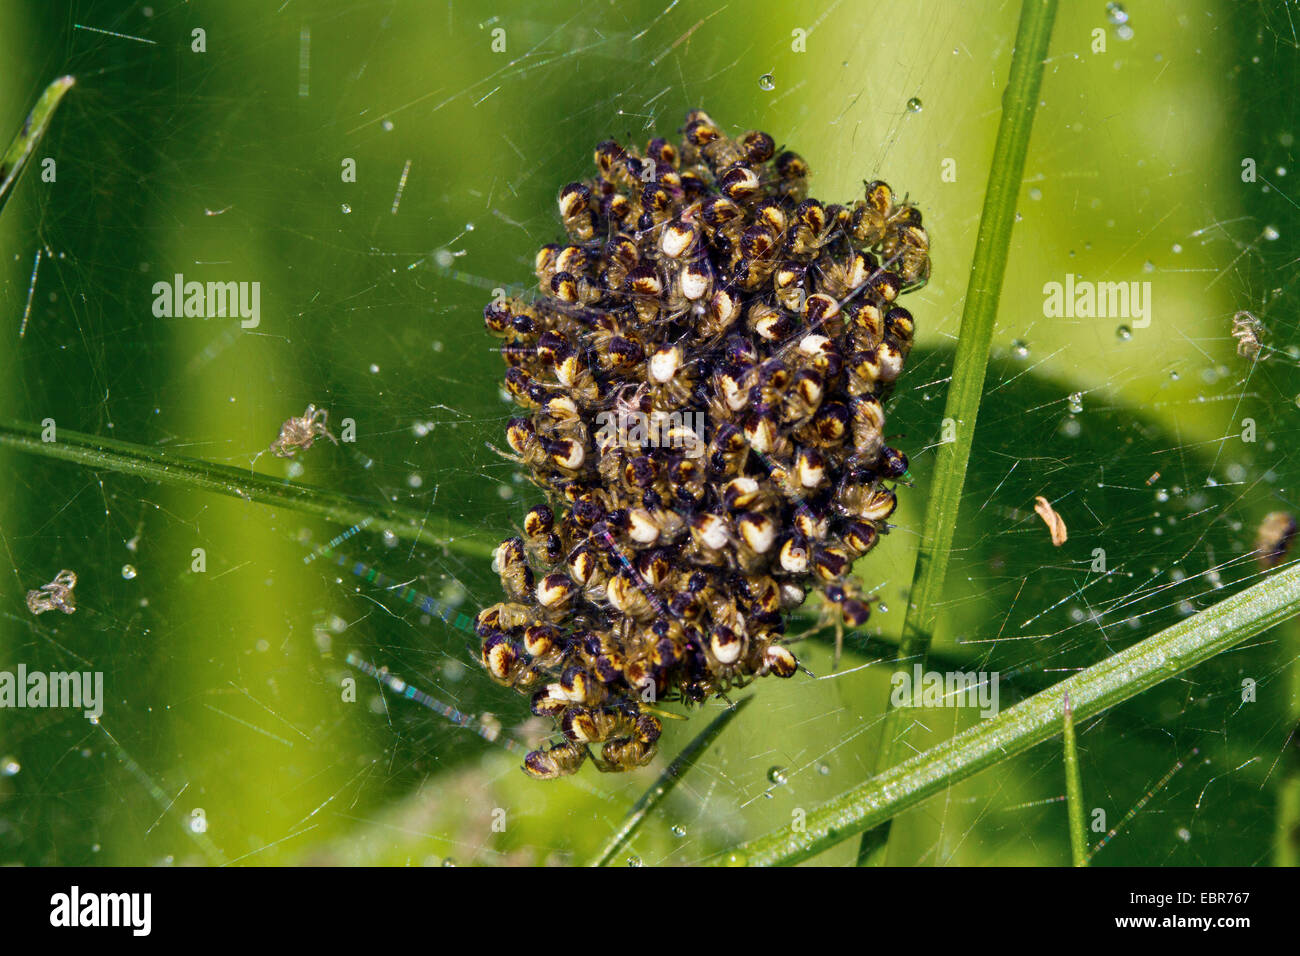 cross orbweaver, European garden spider, cross spider (Araneus diadematus), many young spiders in a web, Germany Stock Photo